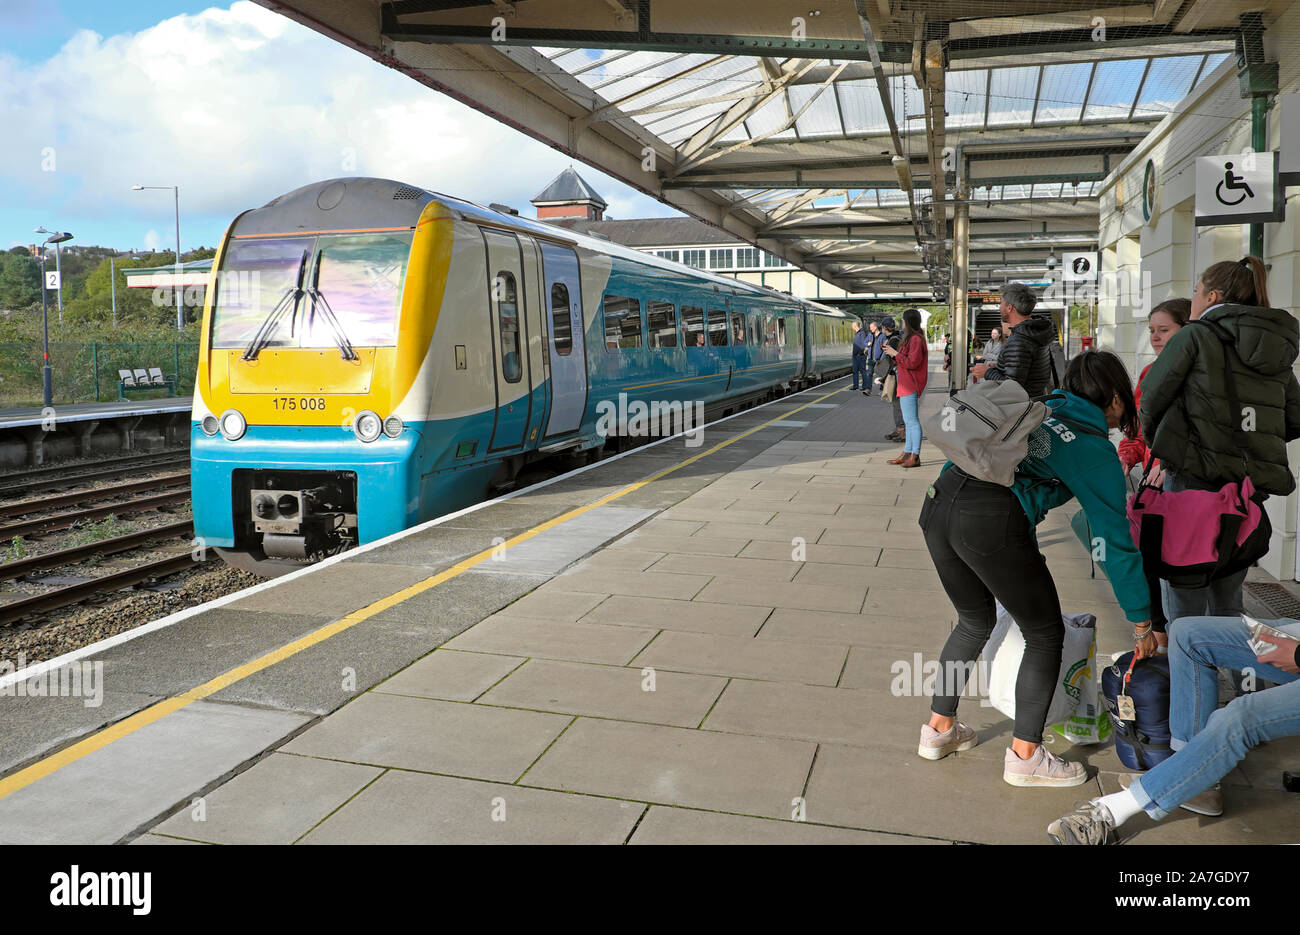 Young people with rucksacks and bags getting on a train at Bangor railway station in Gwynedd North Wales UK  KATHY DEWITT Stock Photo